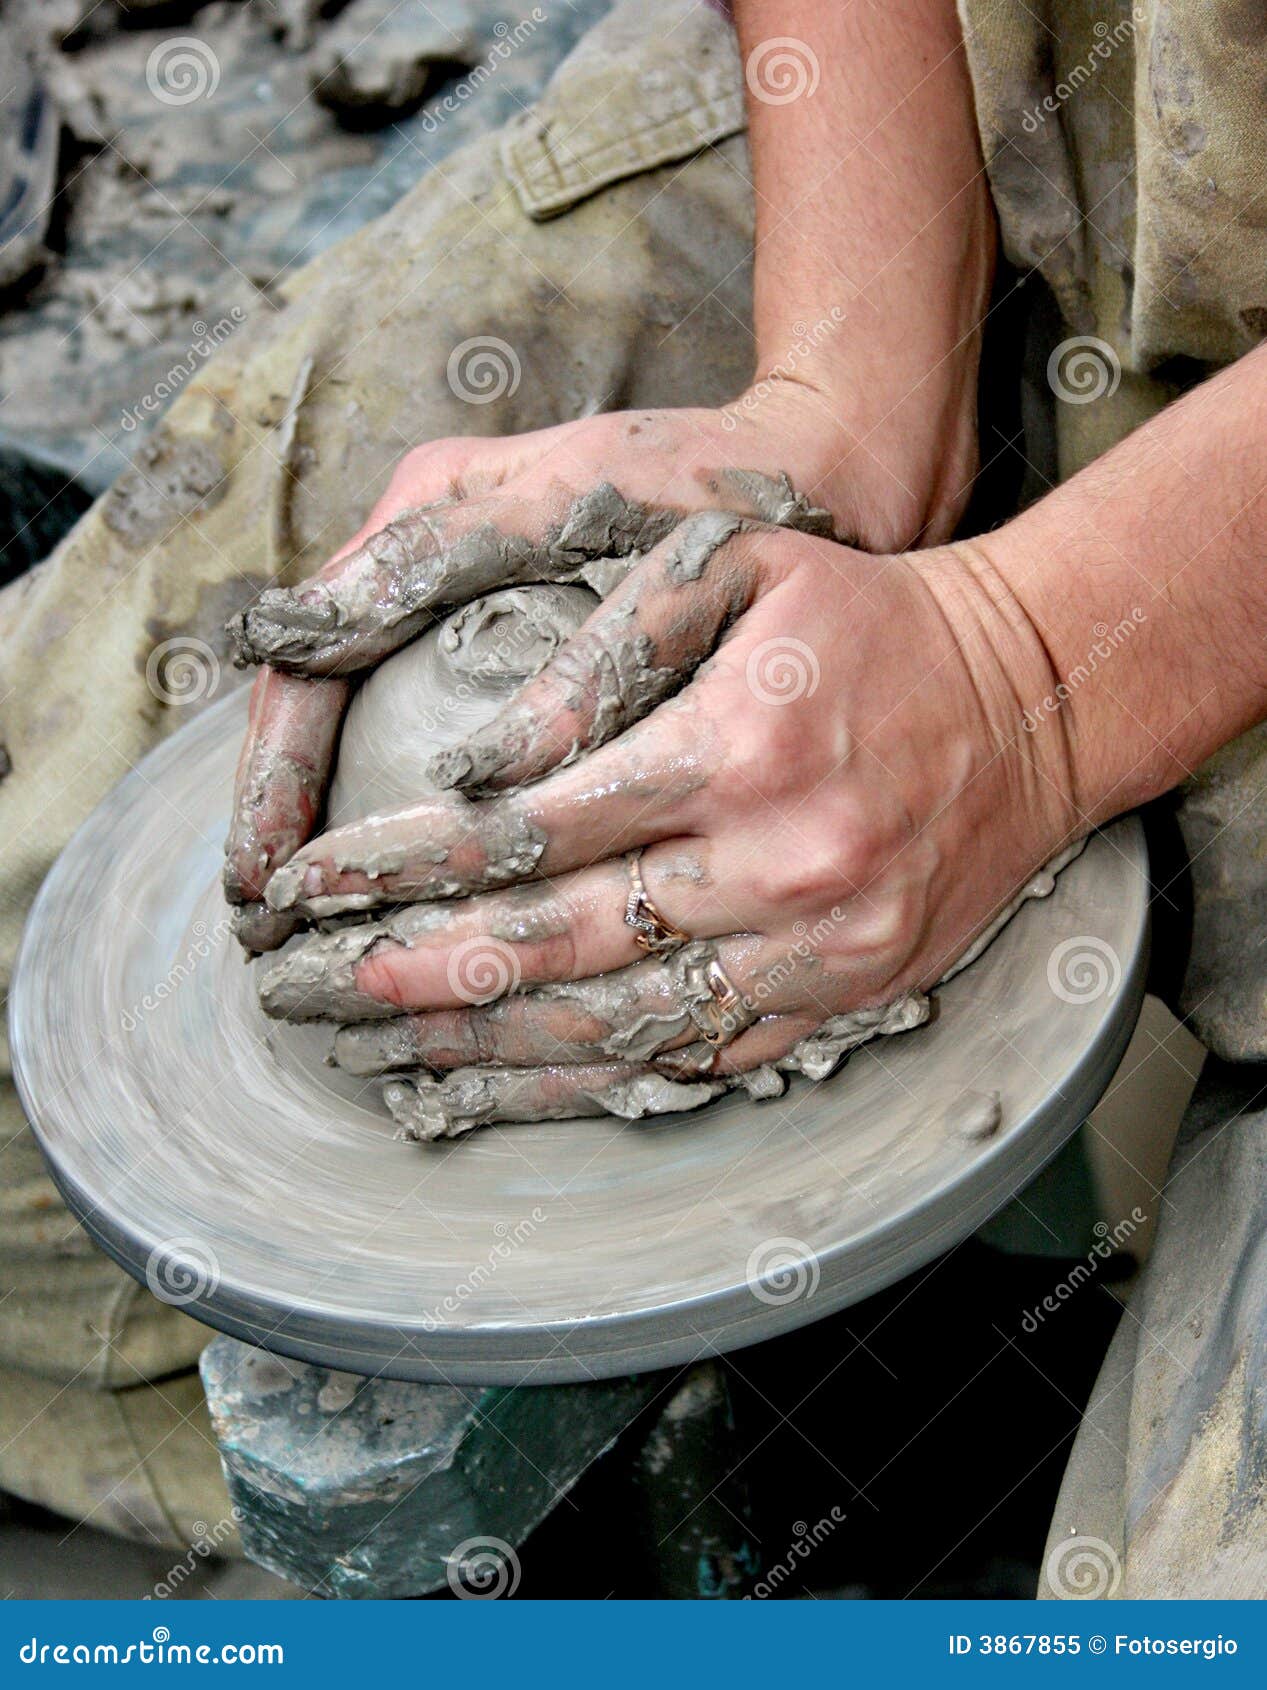 hands shaping clay on potter's wheel